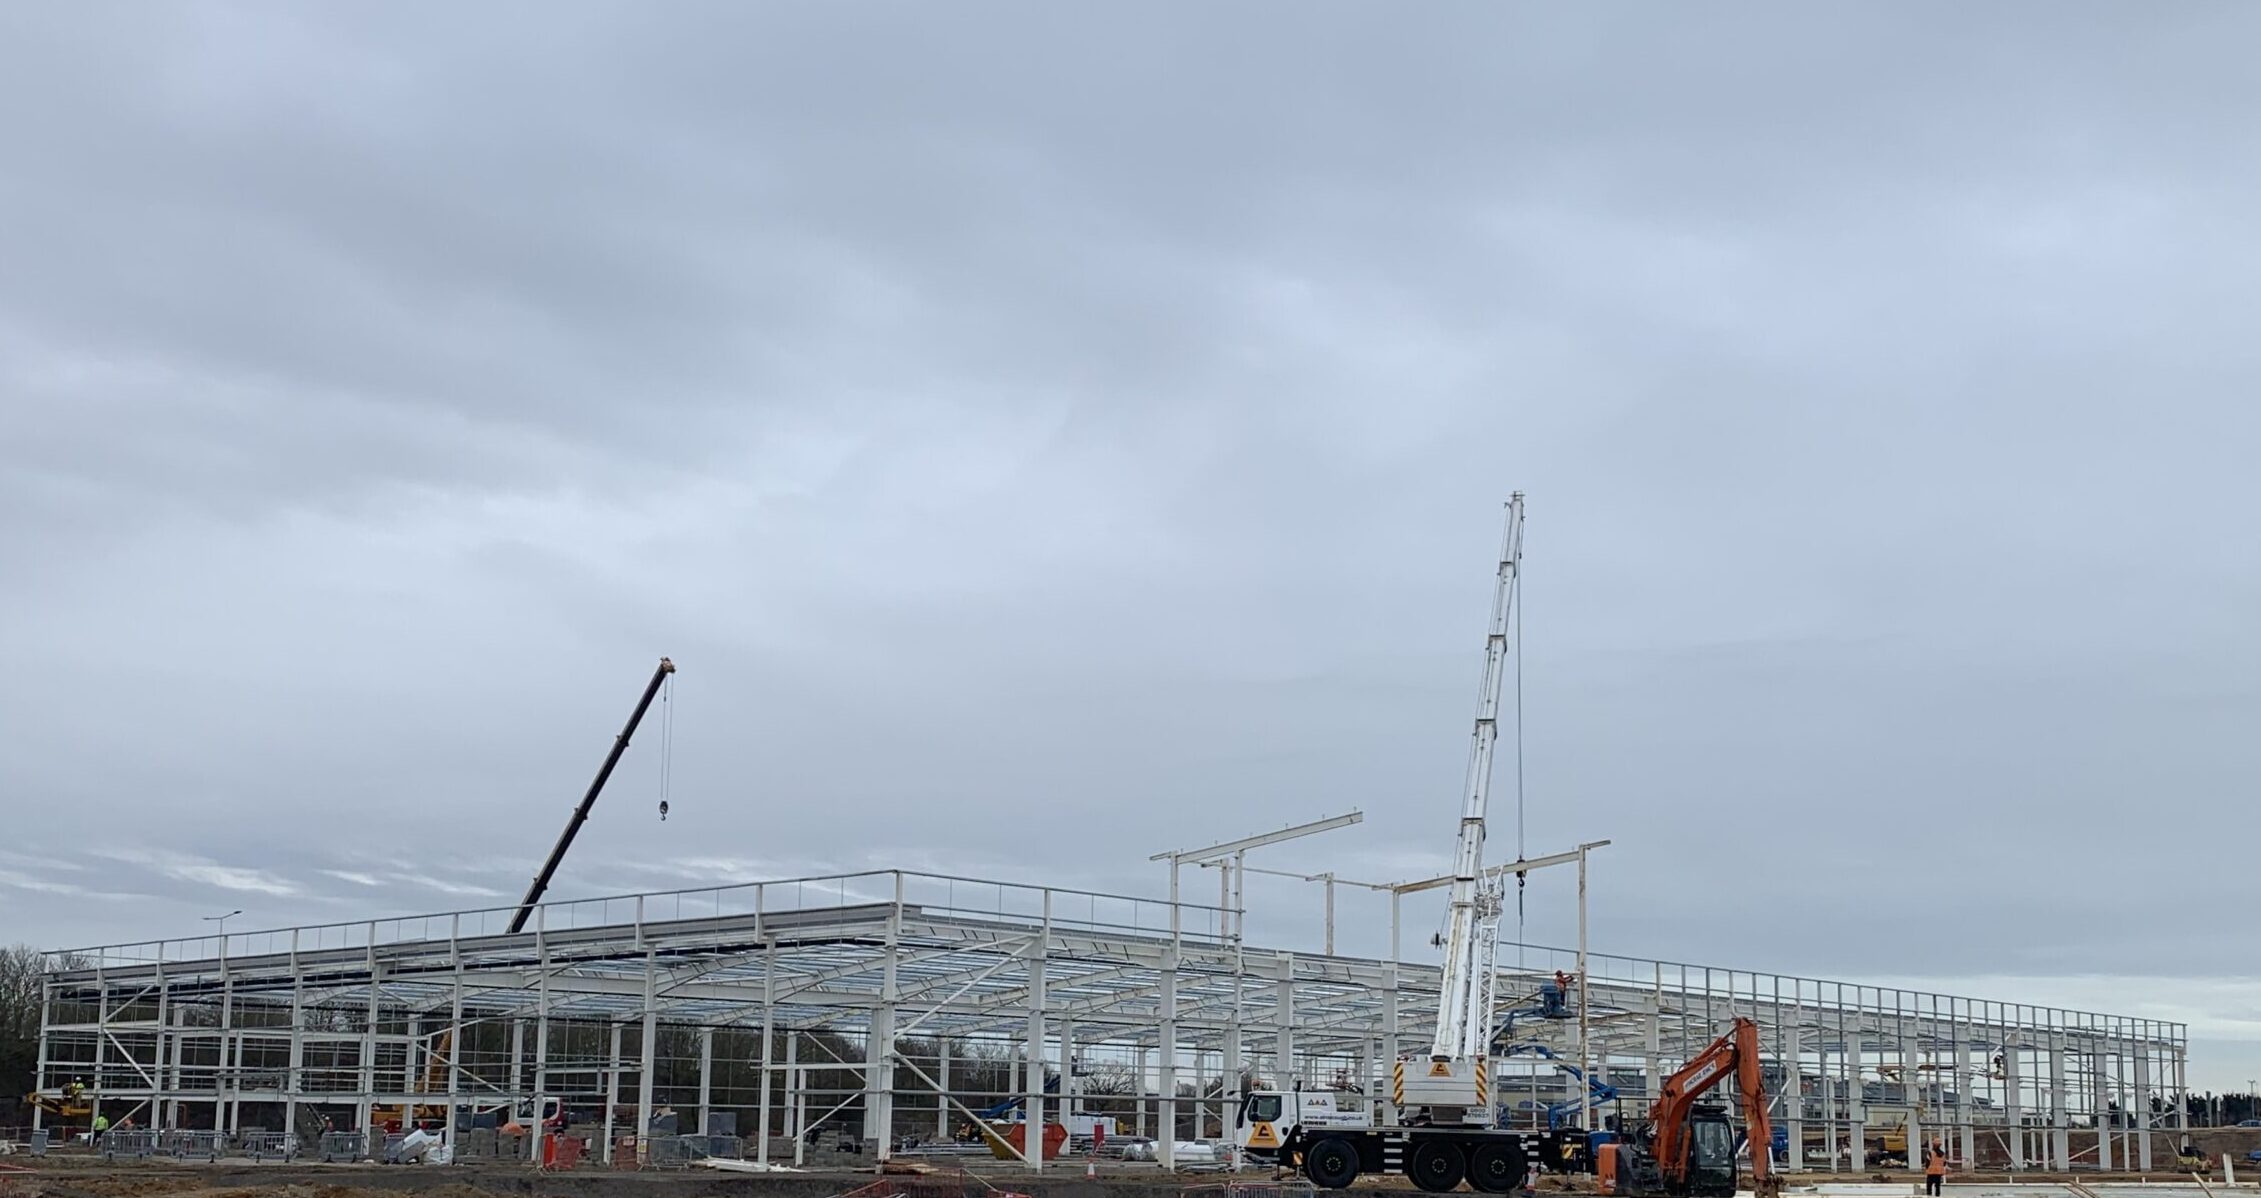 An image of Stane Retail Park's structural frame in construction showing the steel painted white